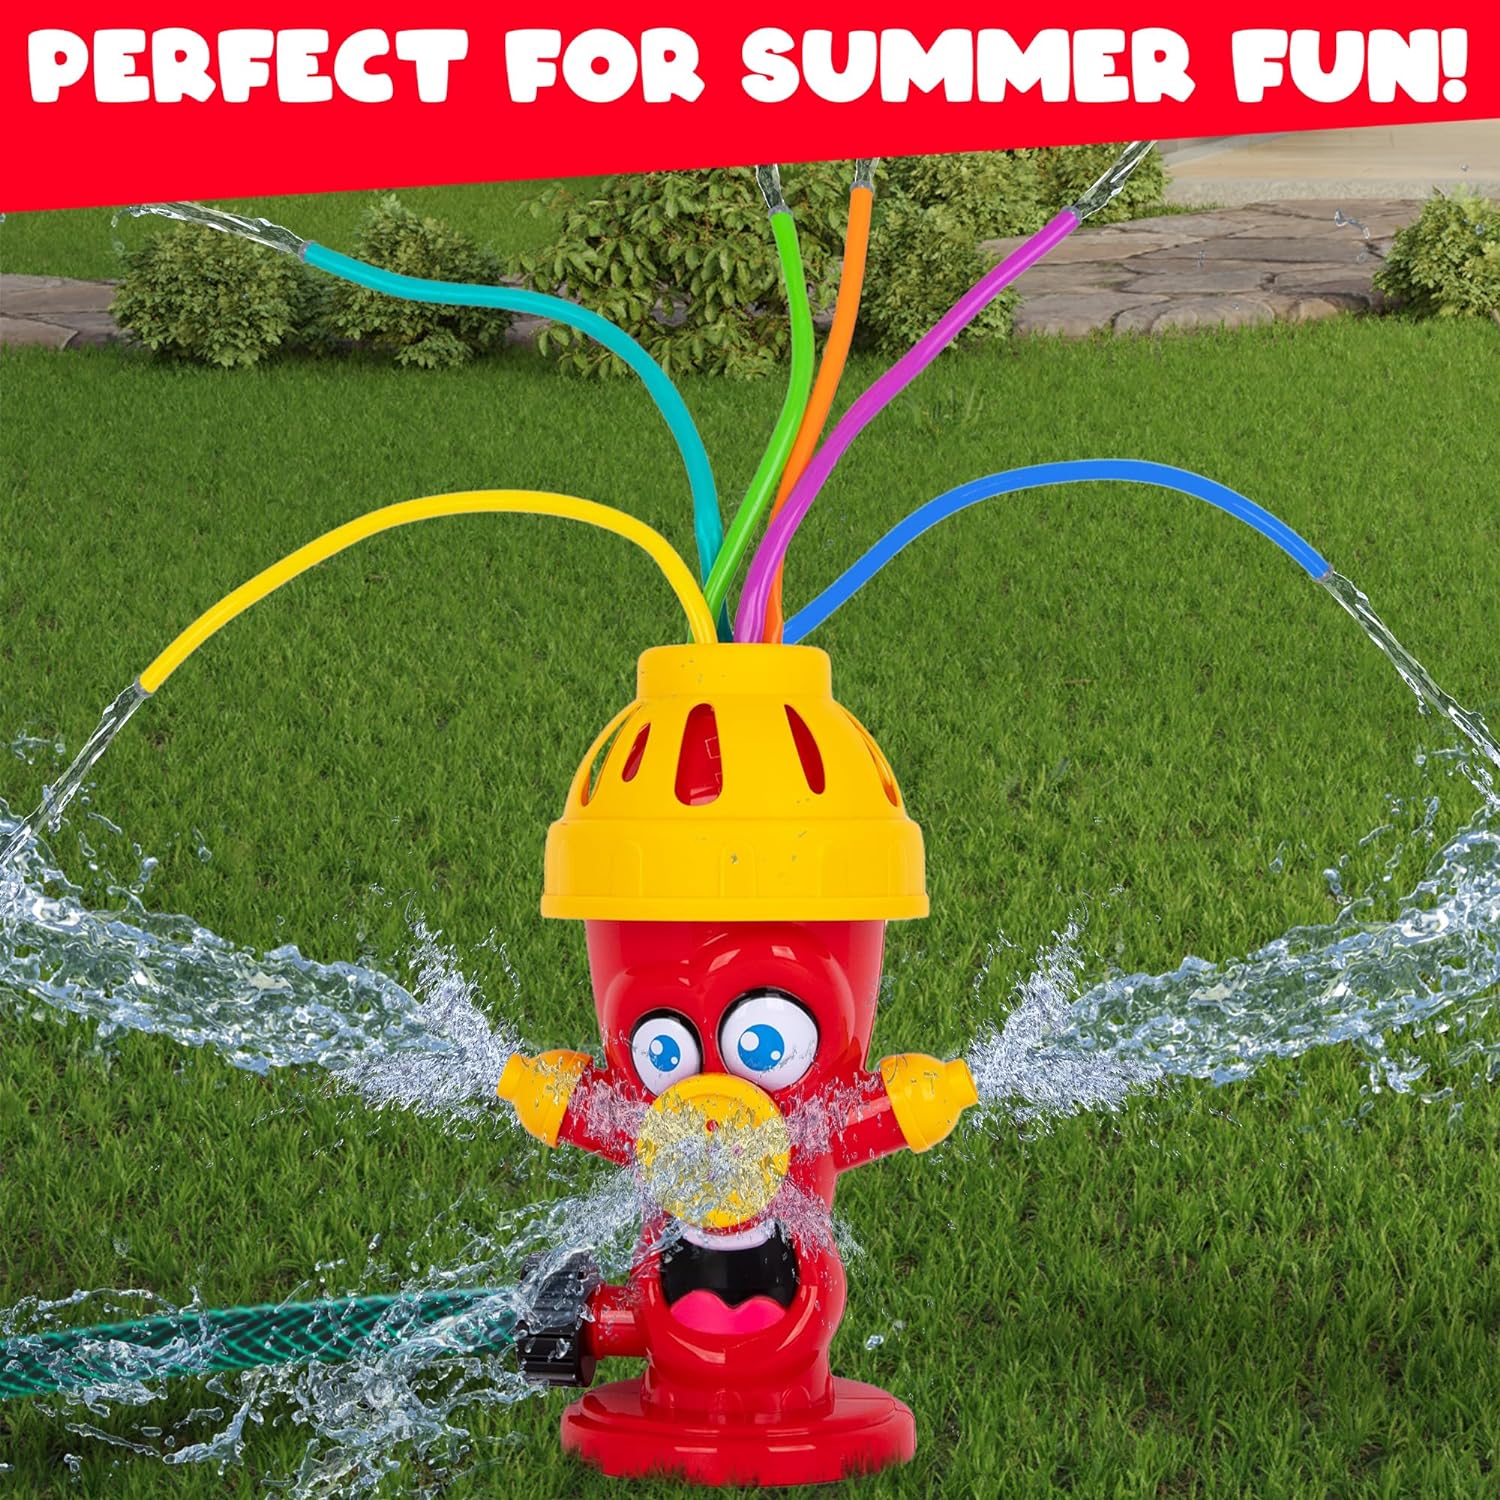 ArtCreativity Fire Hydrant Sprinkler for Kids - Fun Sprinkler for Outdoor Play with Silly Face and Colorful Foam Tubes - Sprinkler Toy for Toddlers - 8-Inch Tall Water Hose for Water Play